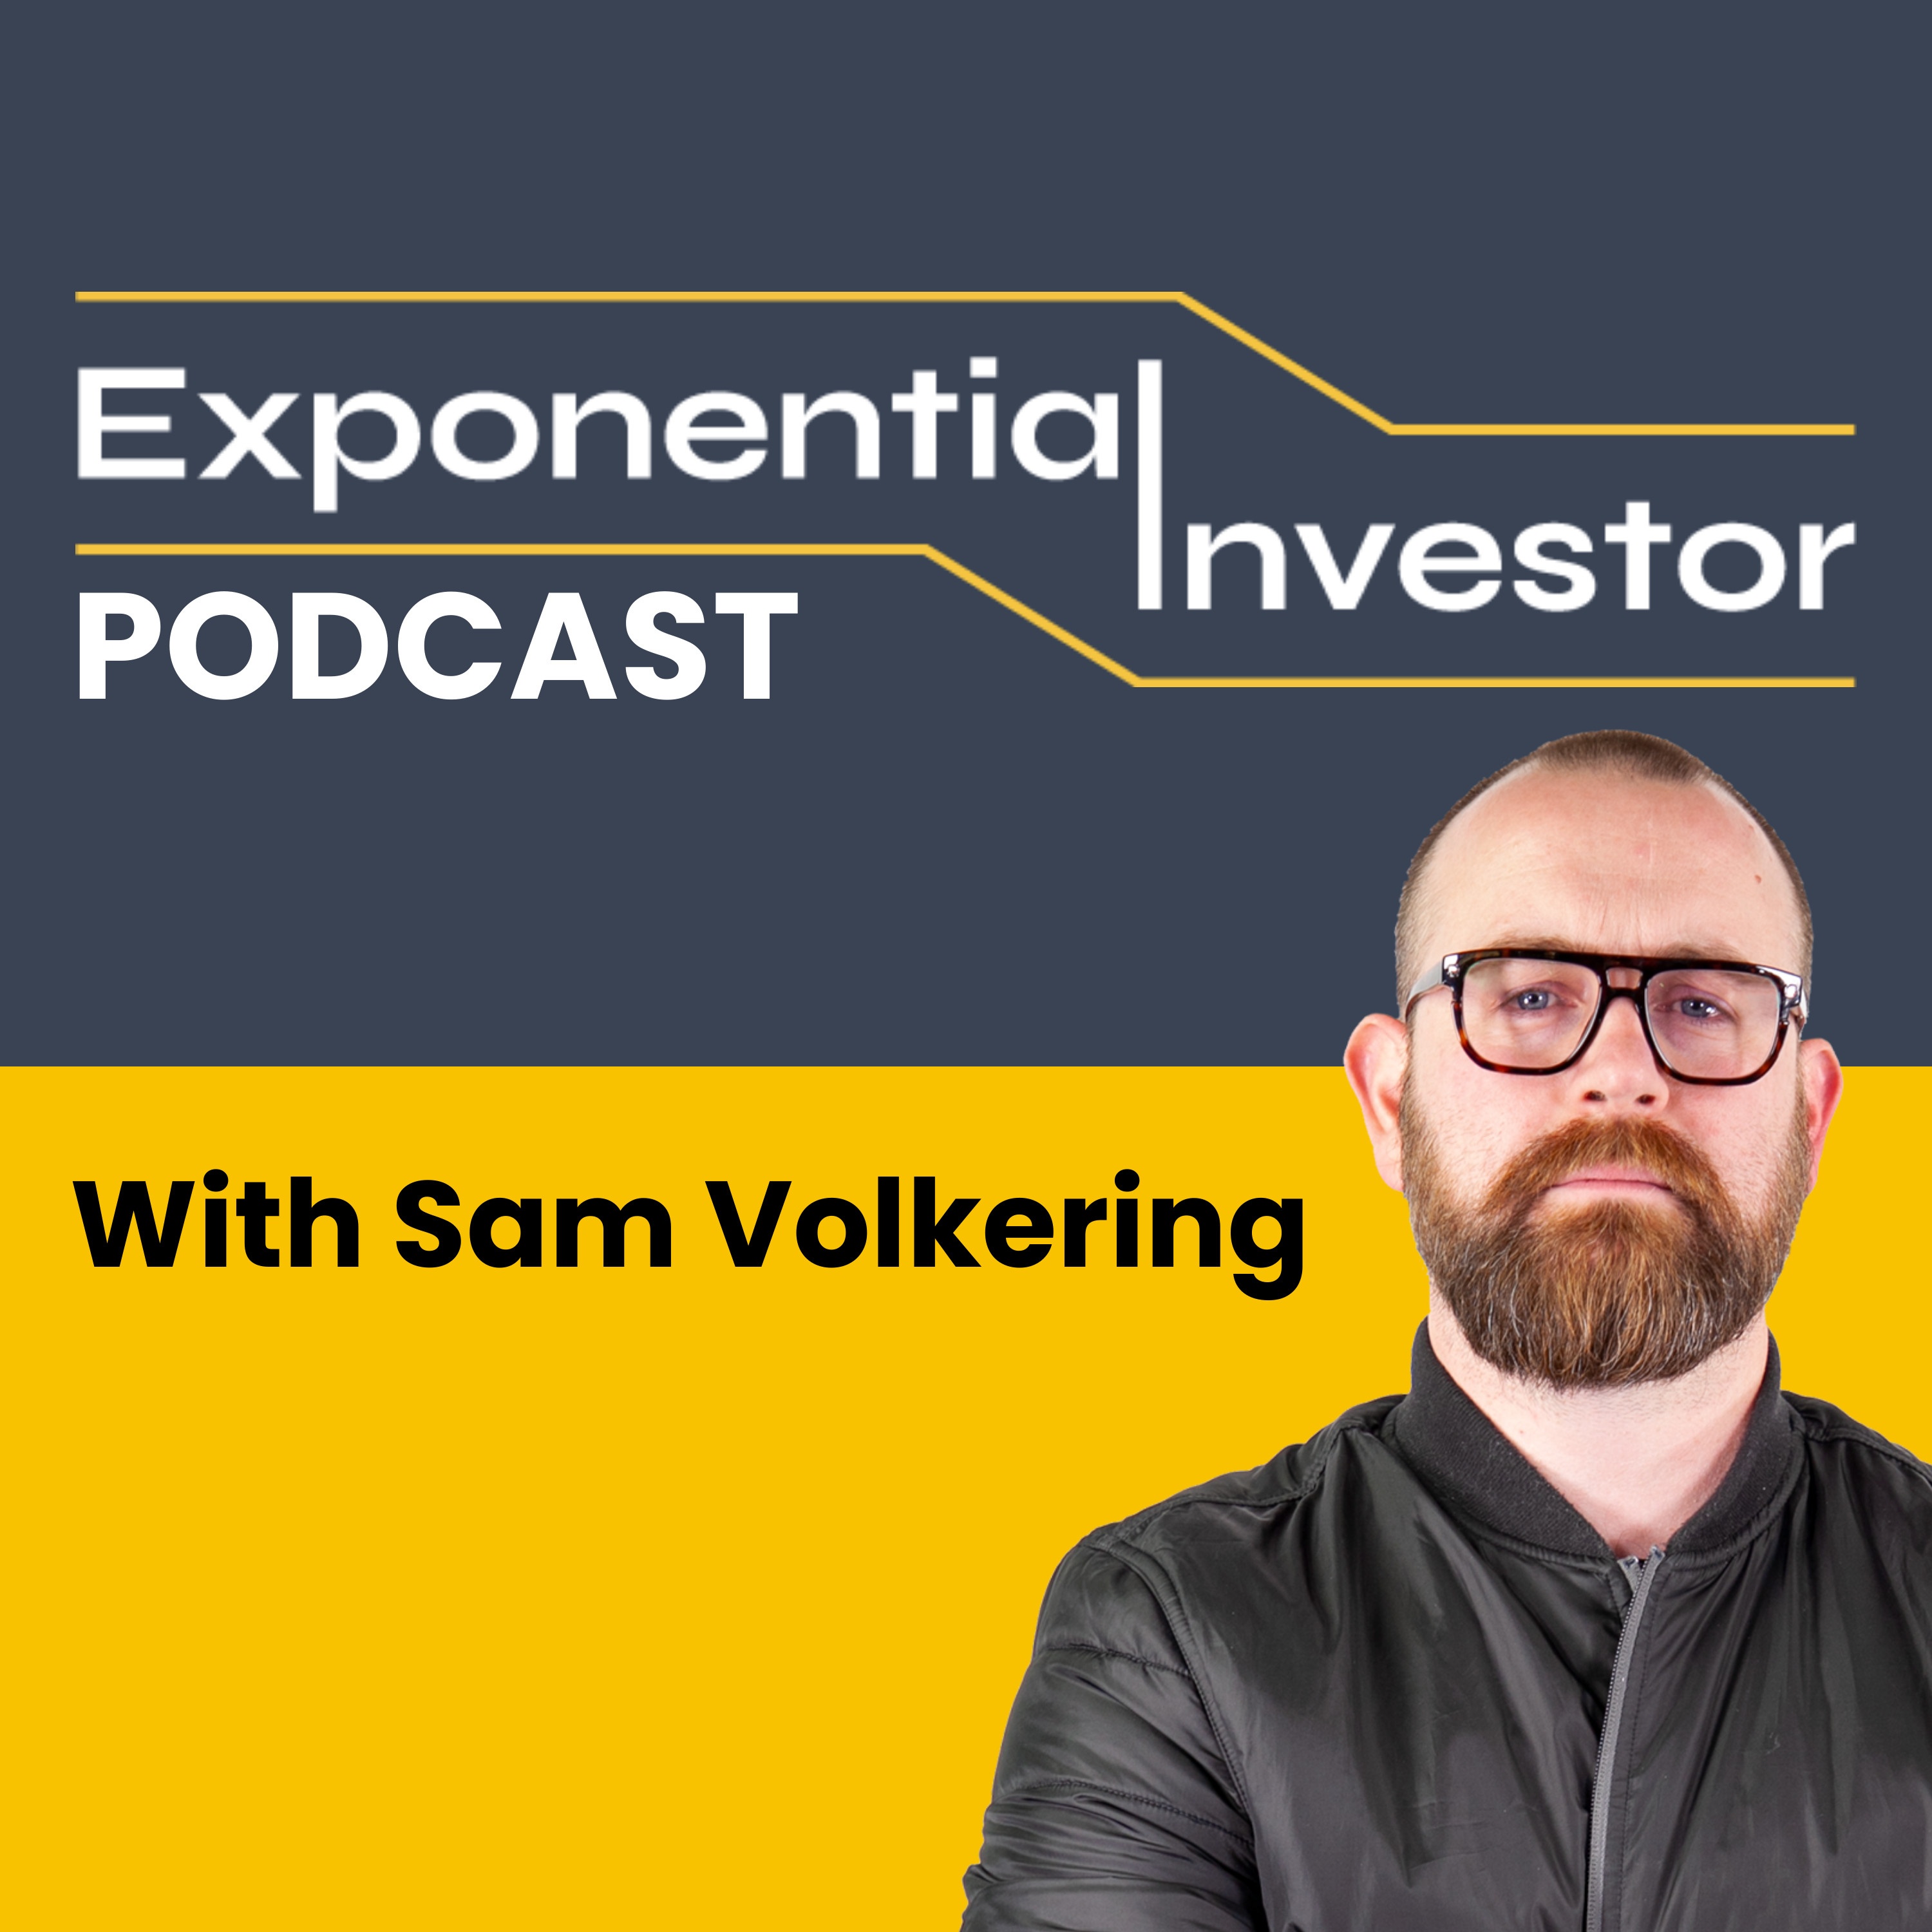 Exponential Investor Podcast